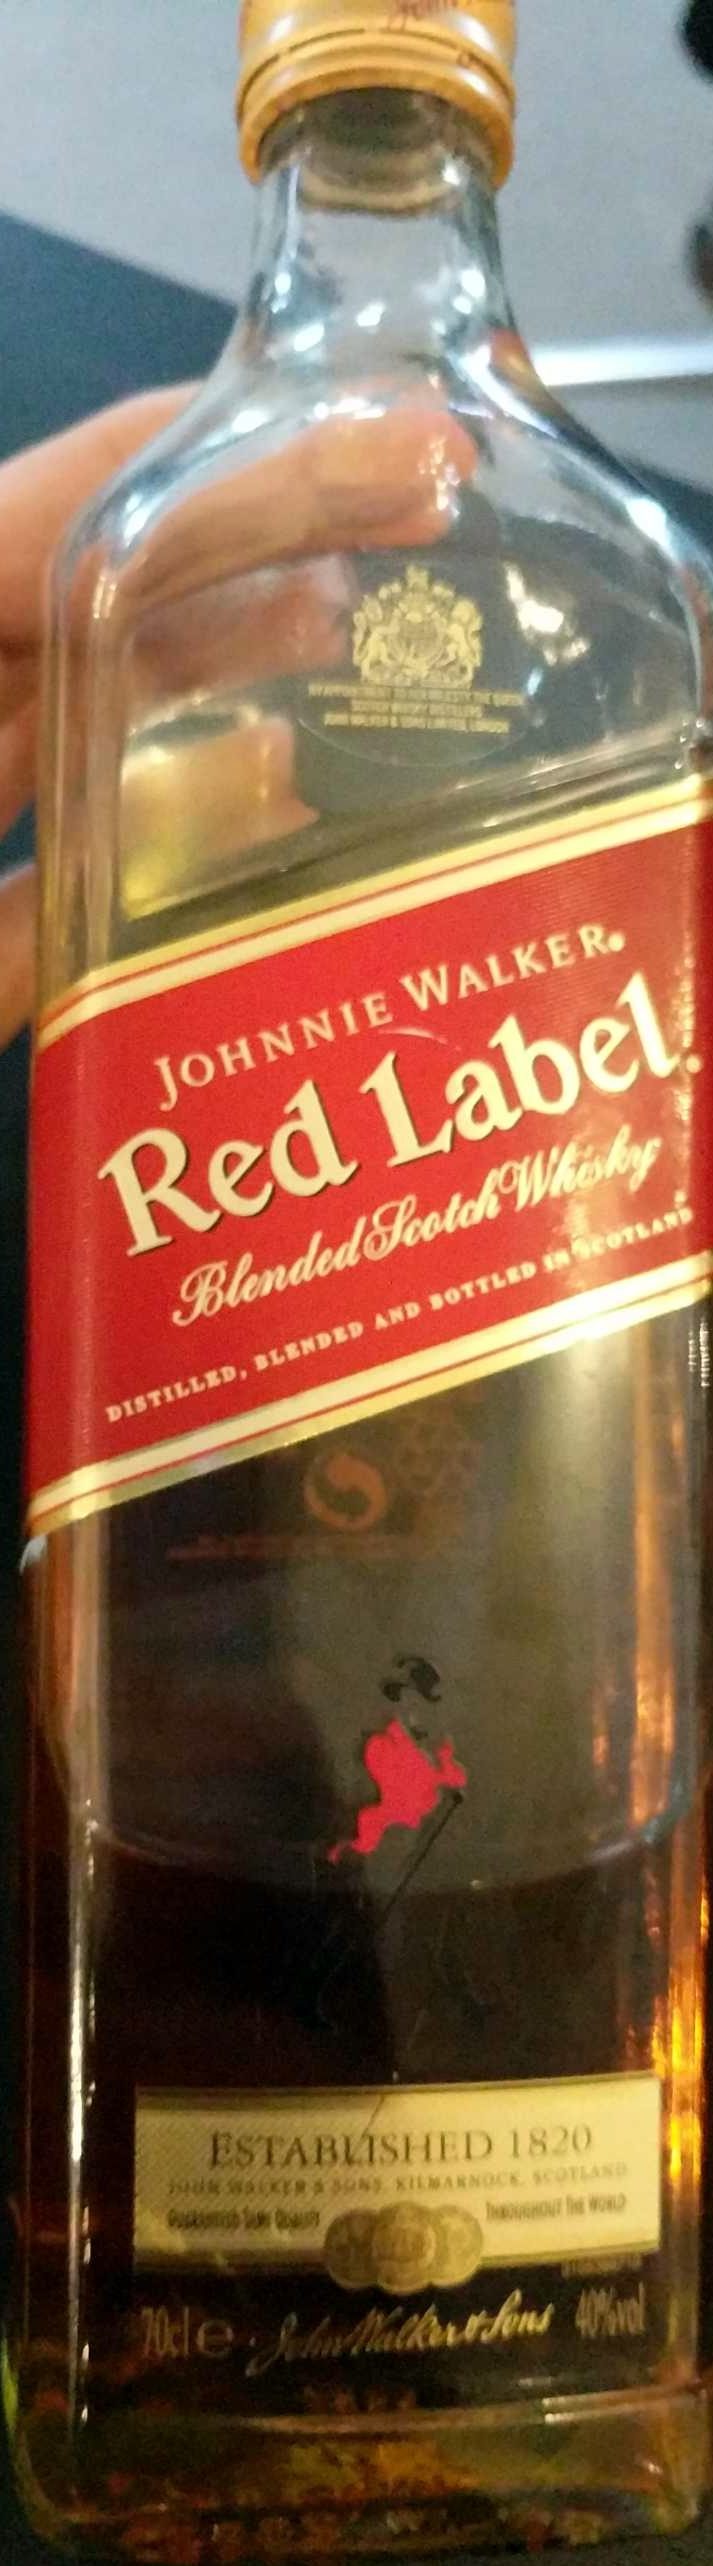 Johnnie Walker Red Label Scotch Whisky - Product